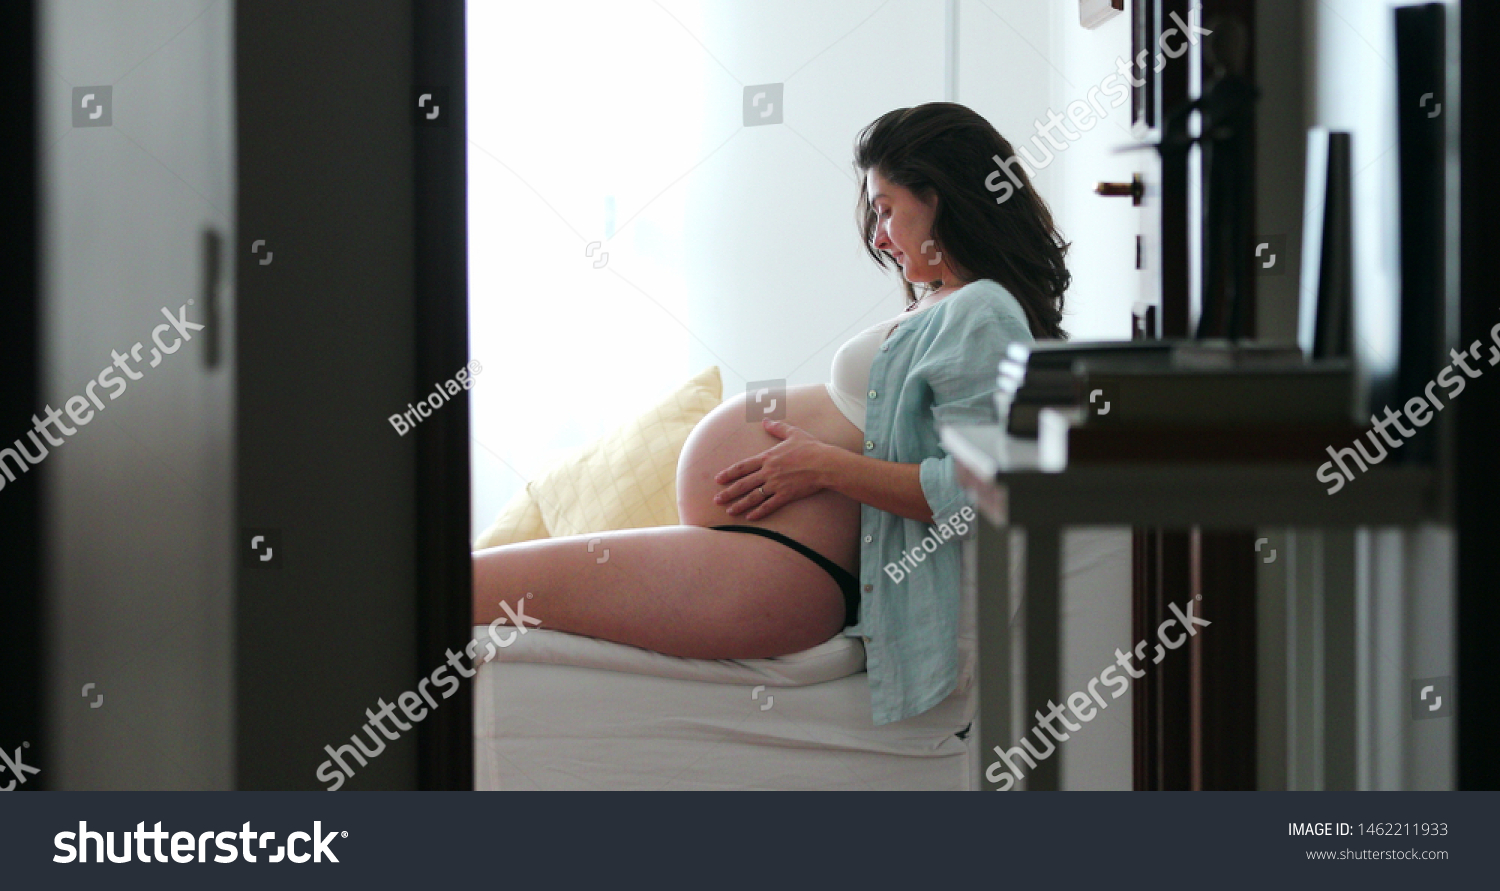 Candid Wife Pregnant